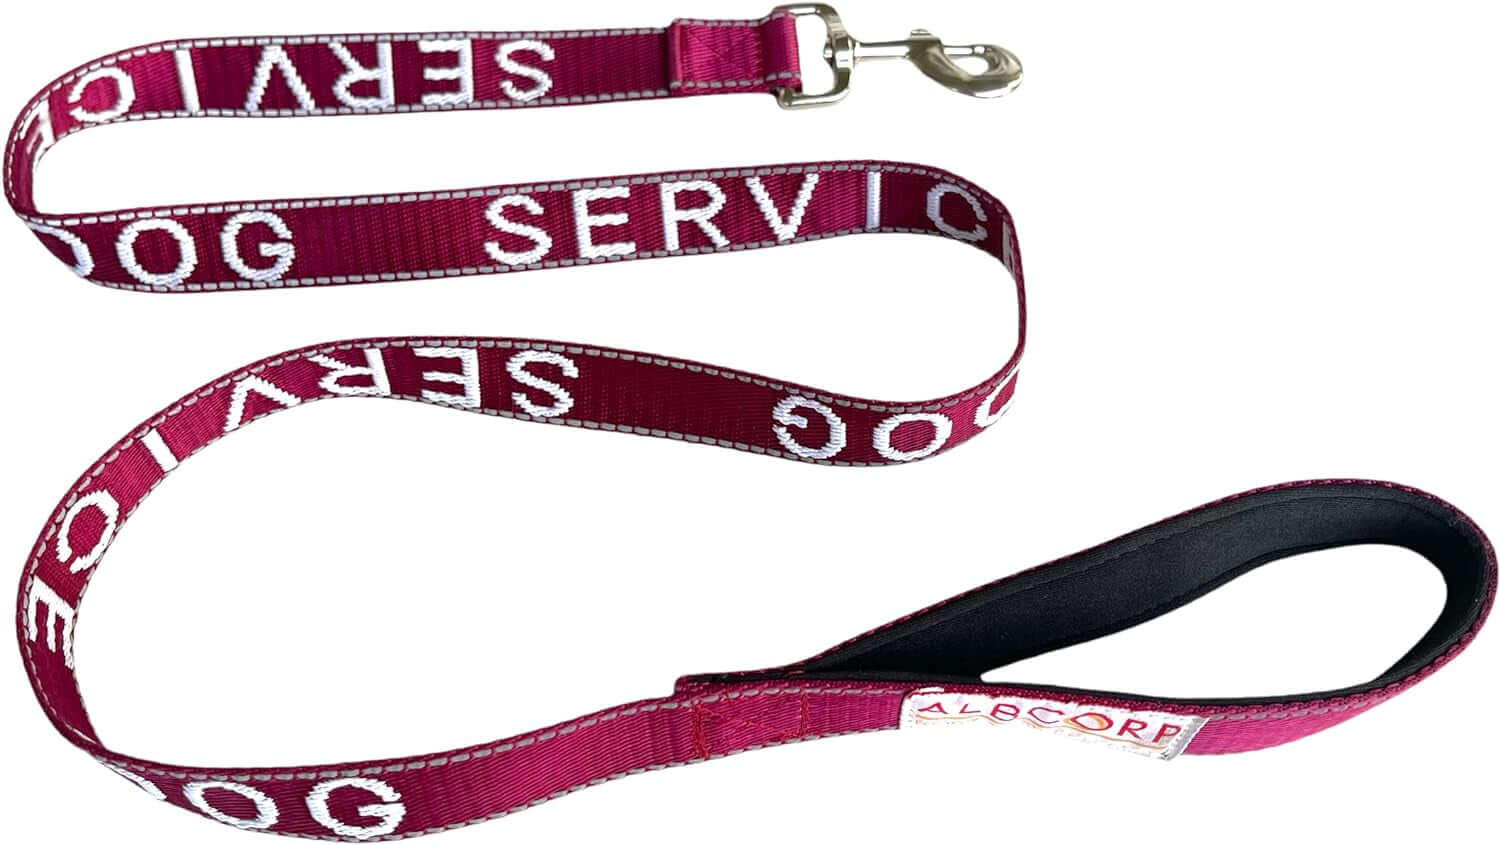 Service Dog Leash - Embroidered- with Padded Neoprene Handle and Reflective Threads, 4 Feet, for Harnesses, Vests or Collars, Maroon